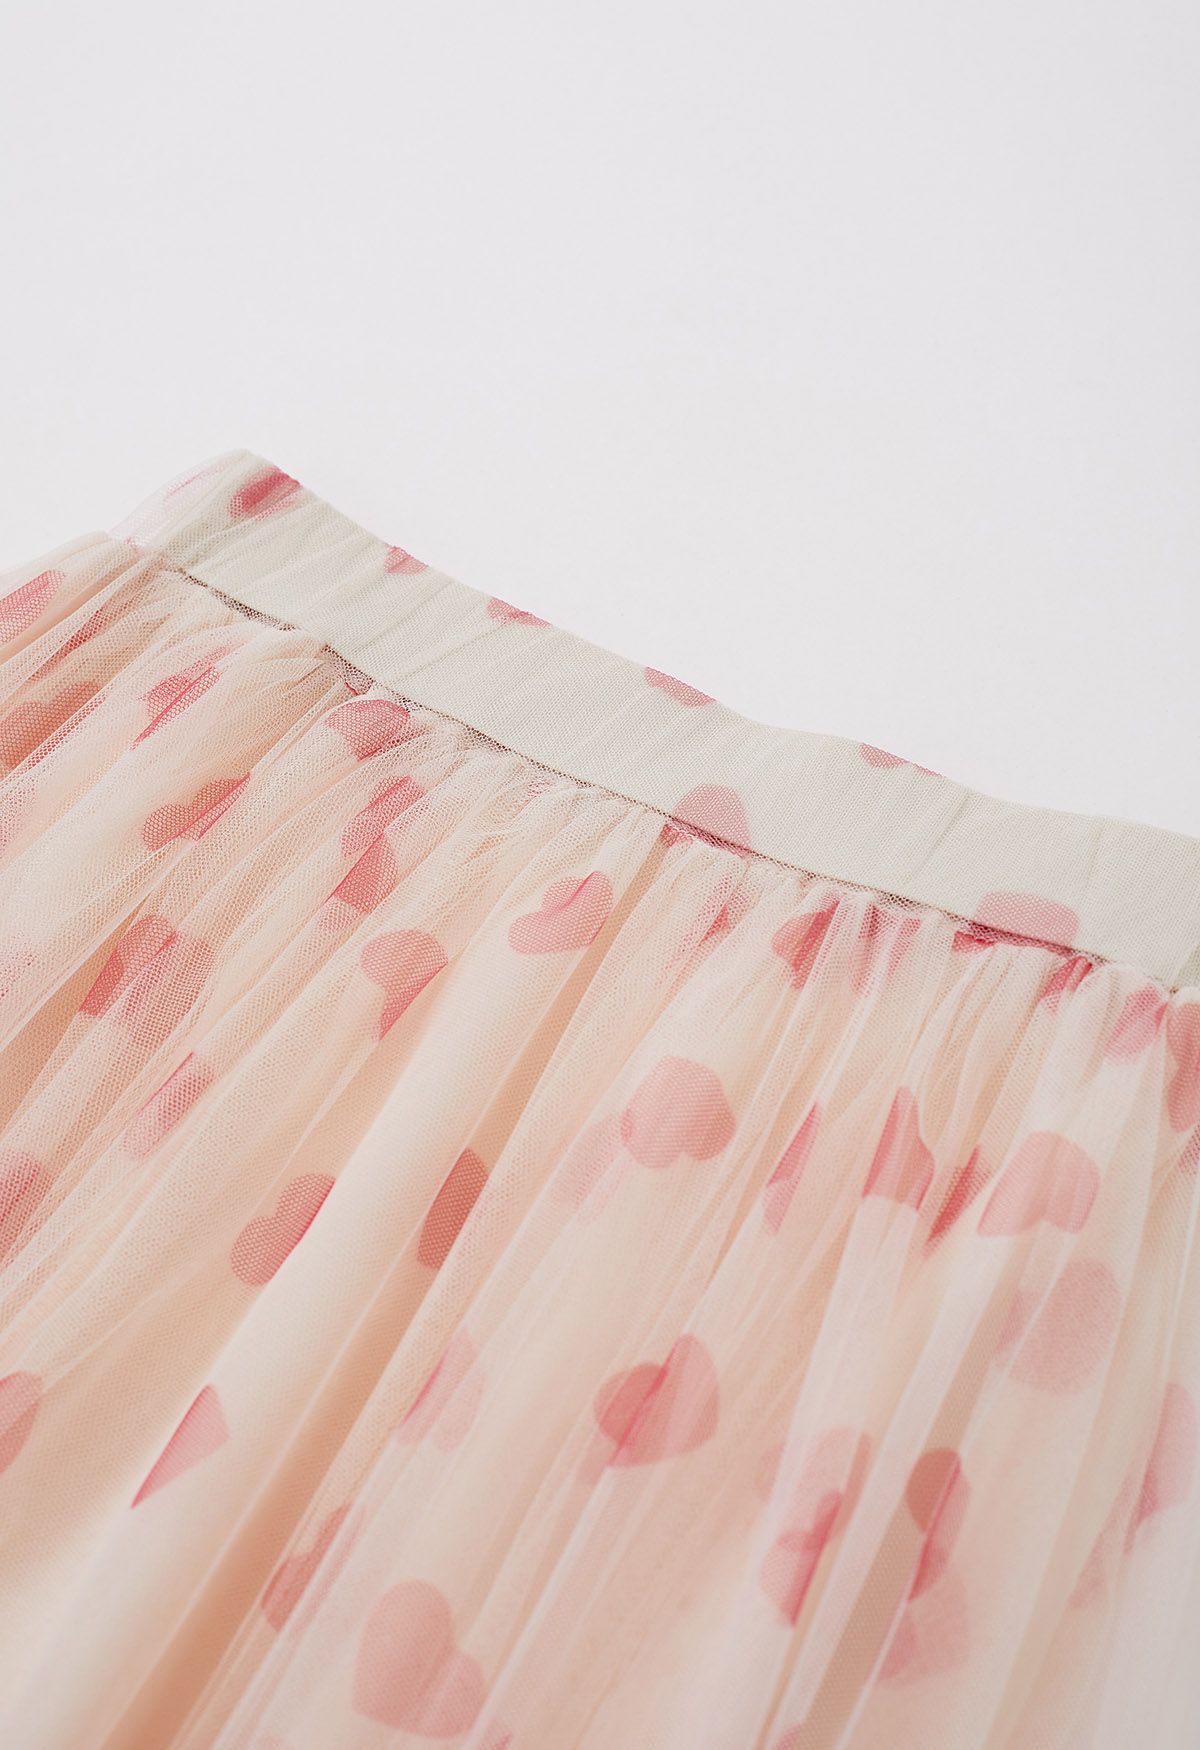 Can't Let Go Mesh Tulle Midi Skirt in Pink Heart